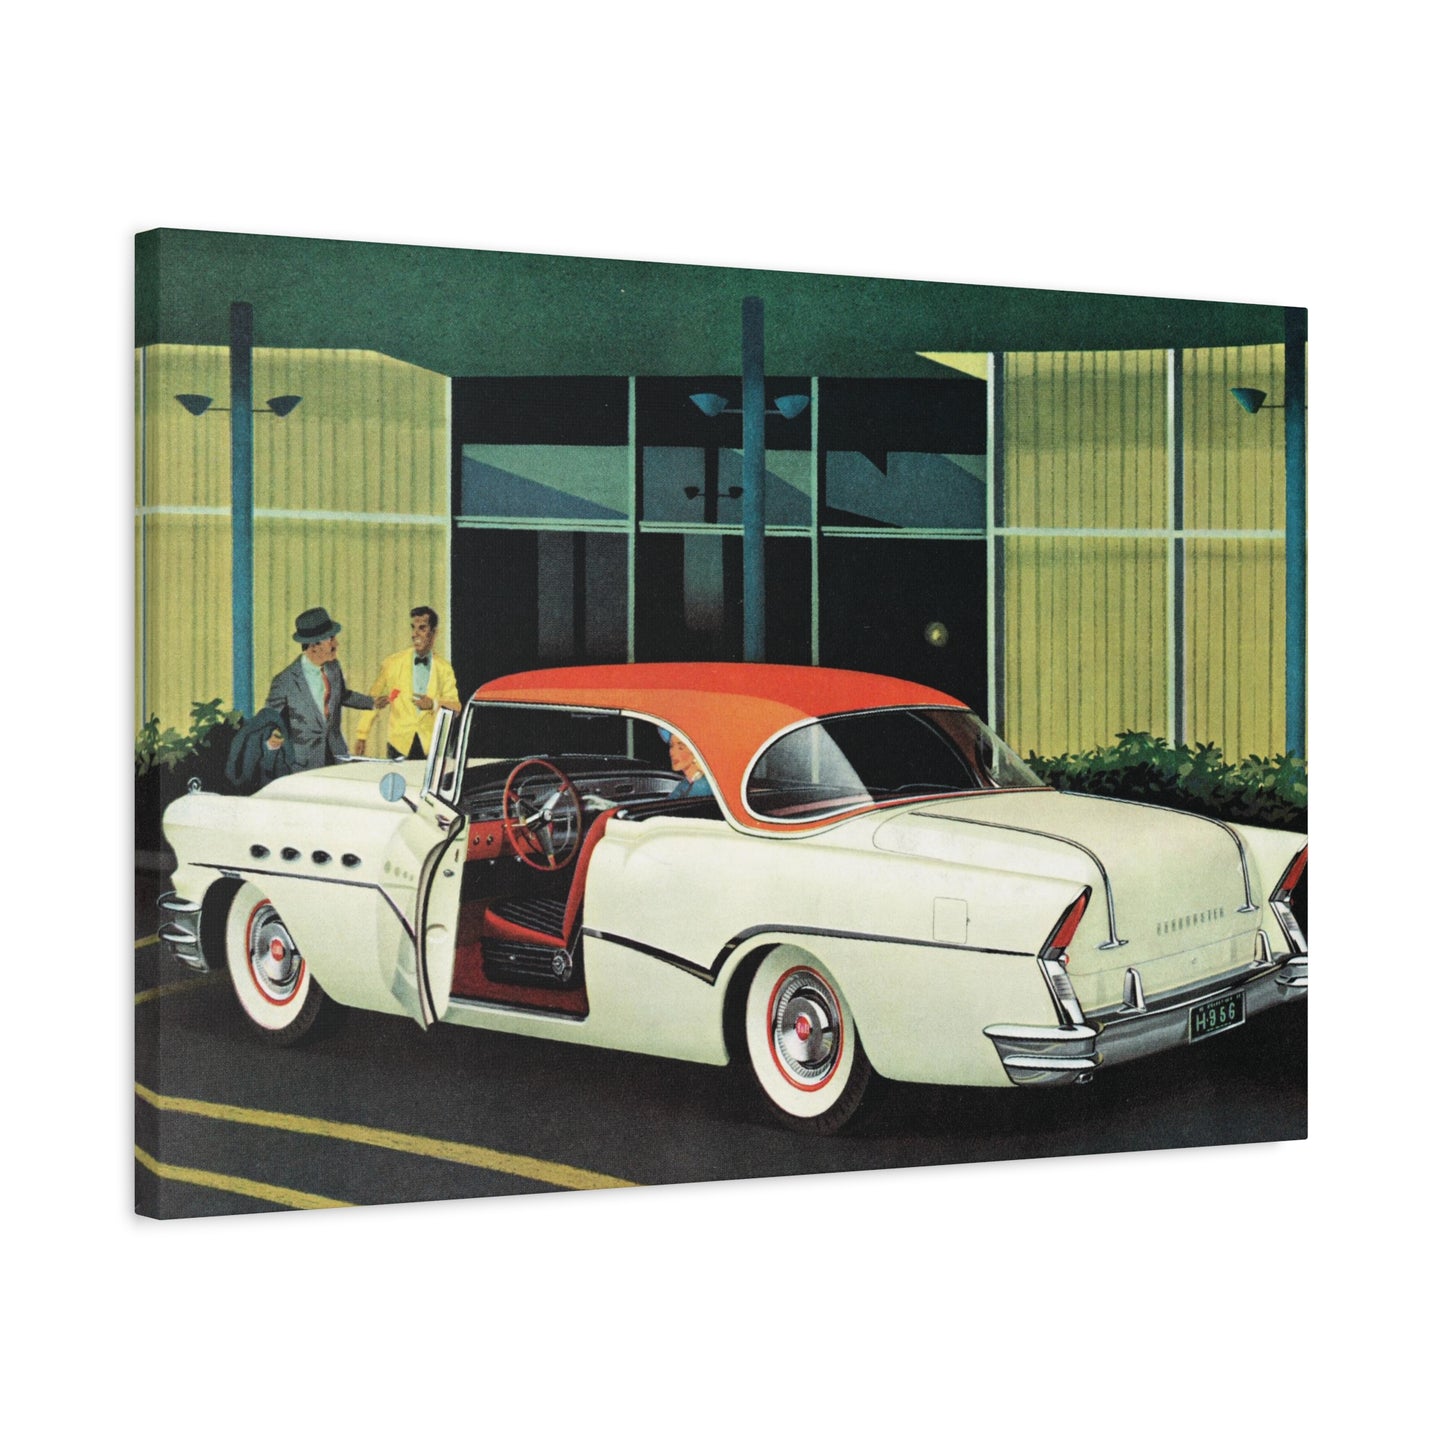 Classic two-tone car from the 1950s parked in front of a mid-century modern building with two men talking.